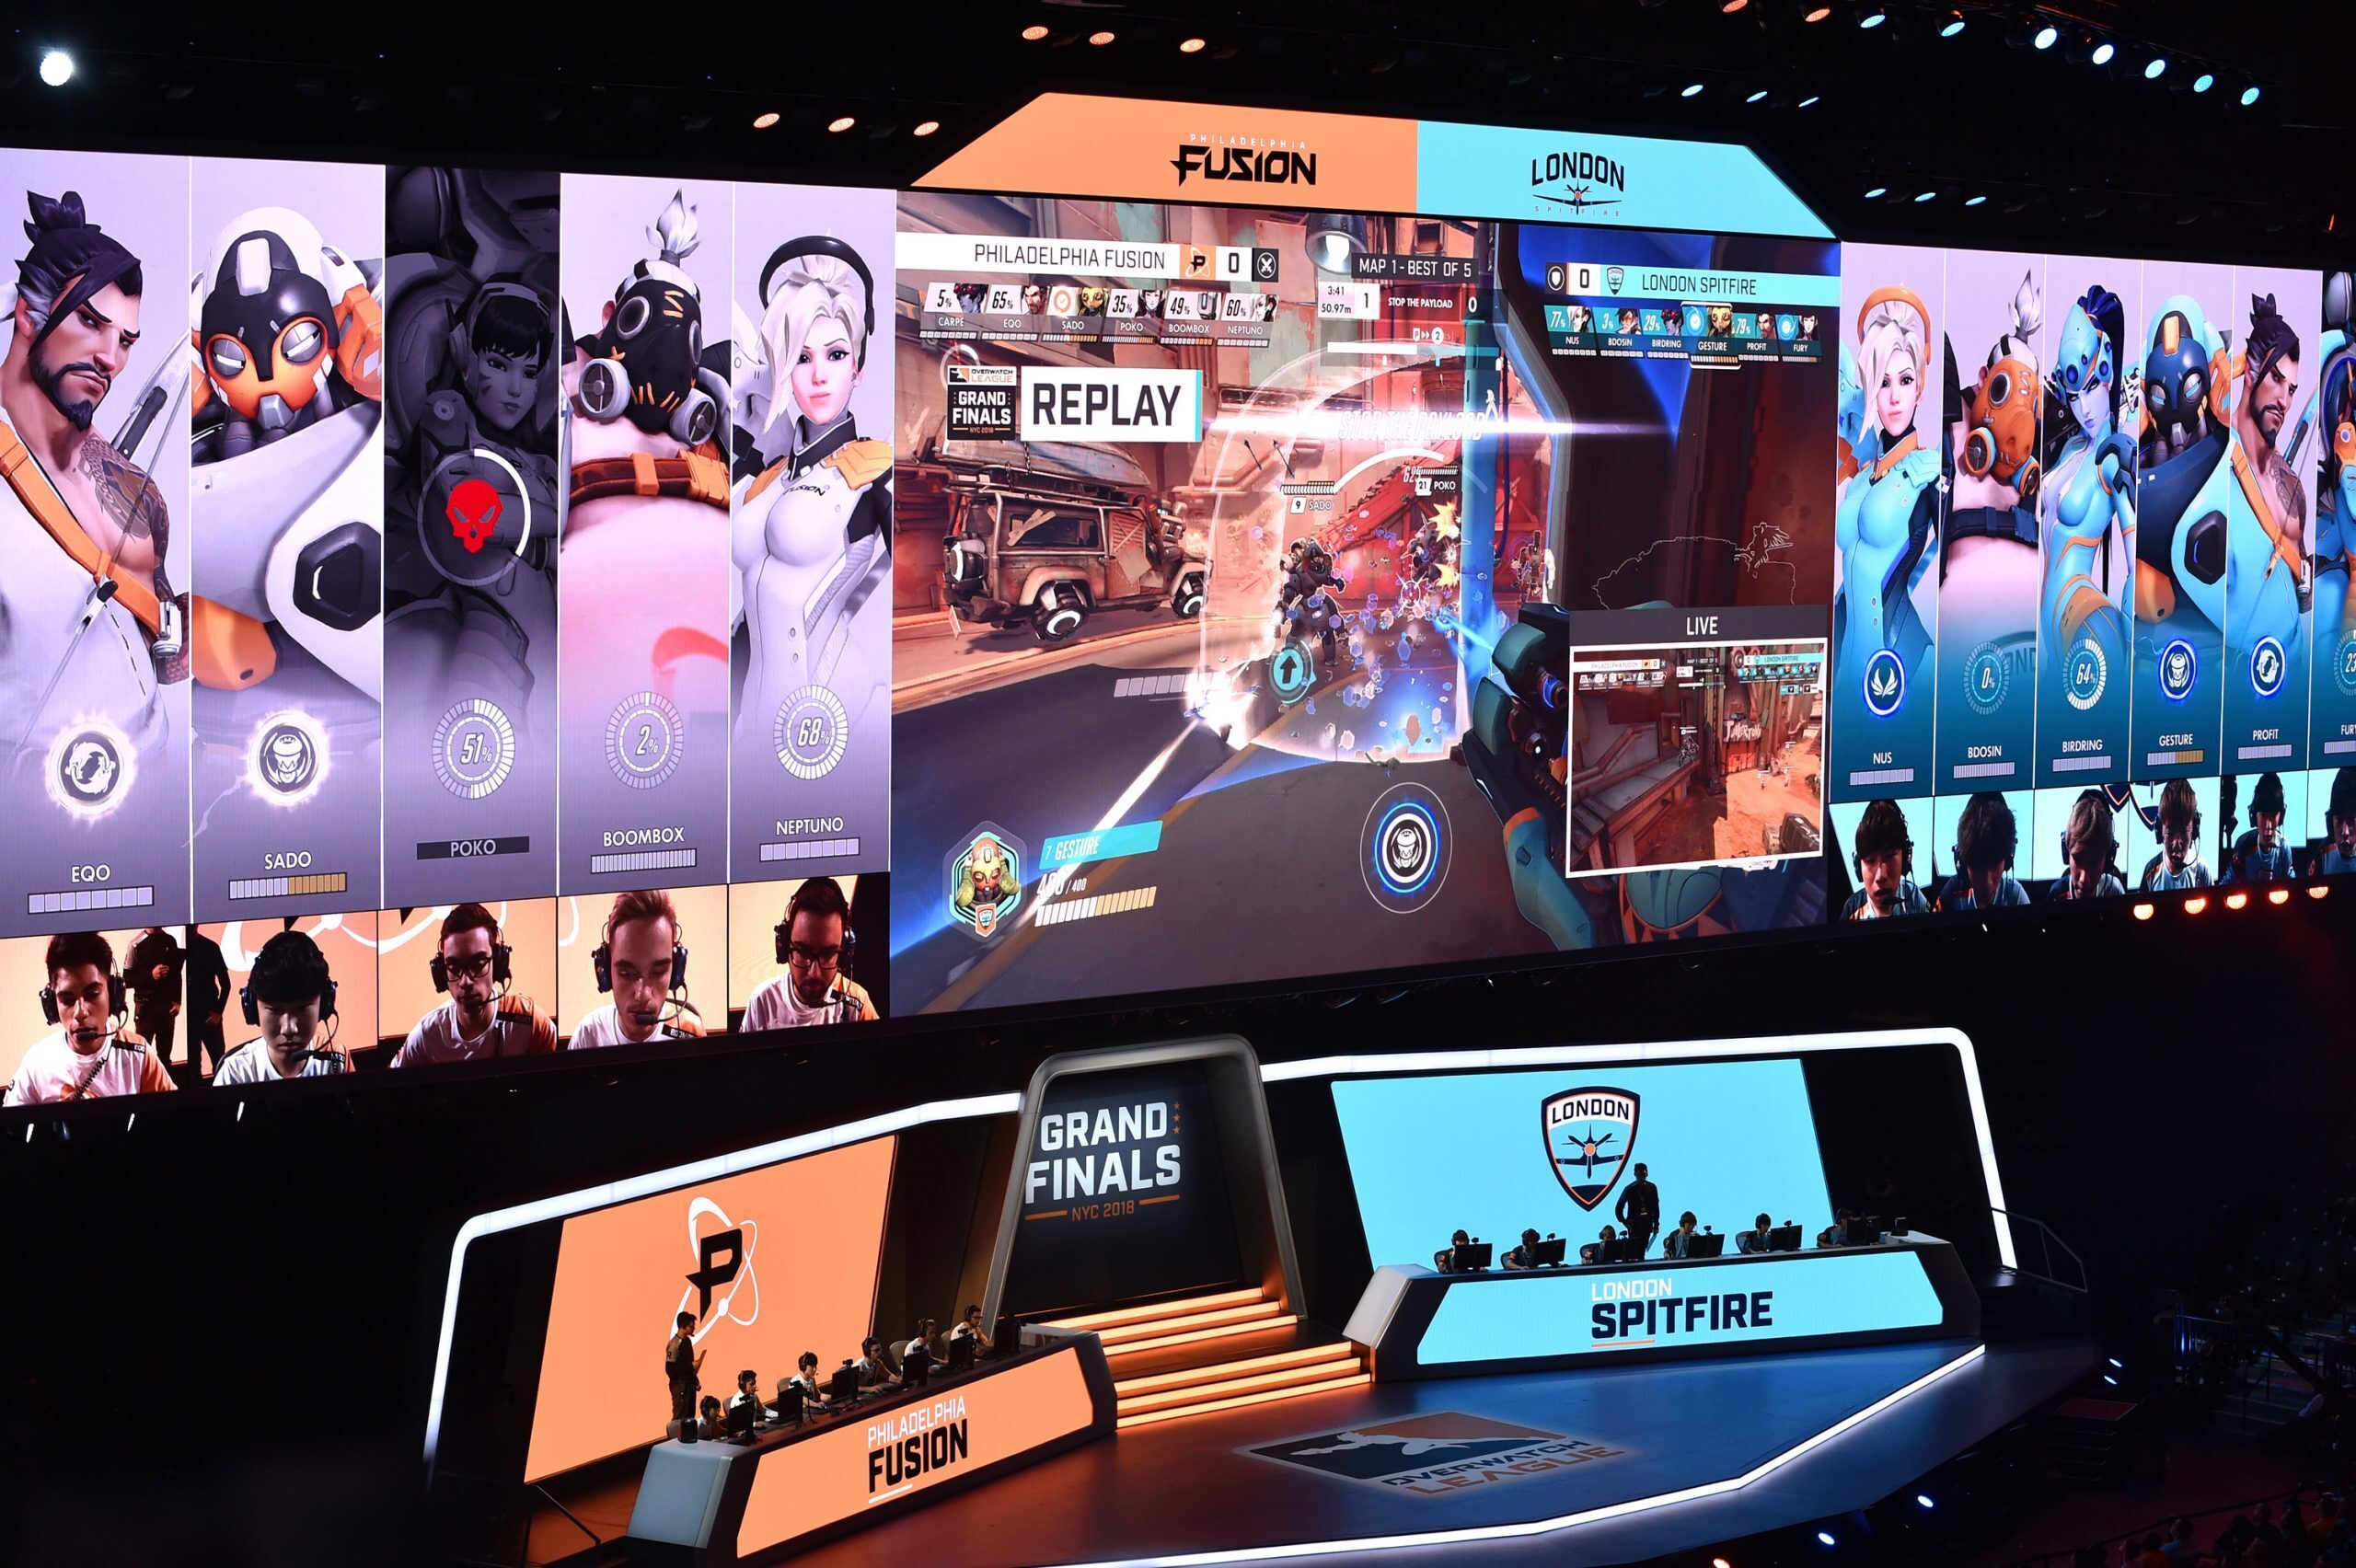 Philadelphia Fusion play London Spitfire during Overwatch League Grand Finals. (Photo by Bryan Bedder/Getty Images for Blizzard Entertainment)